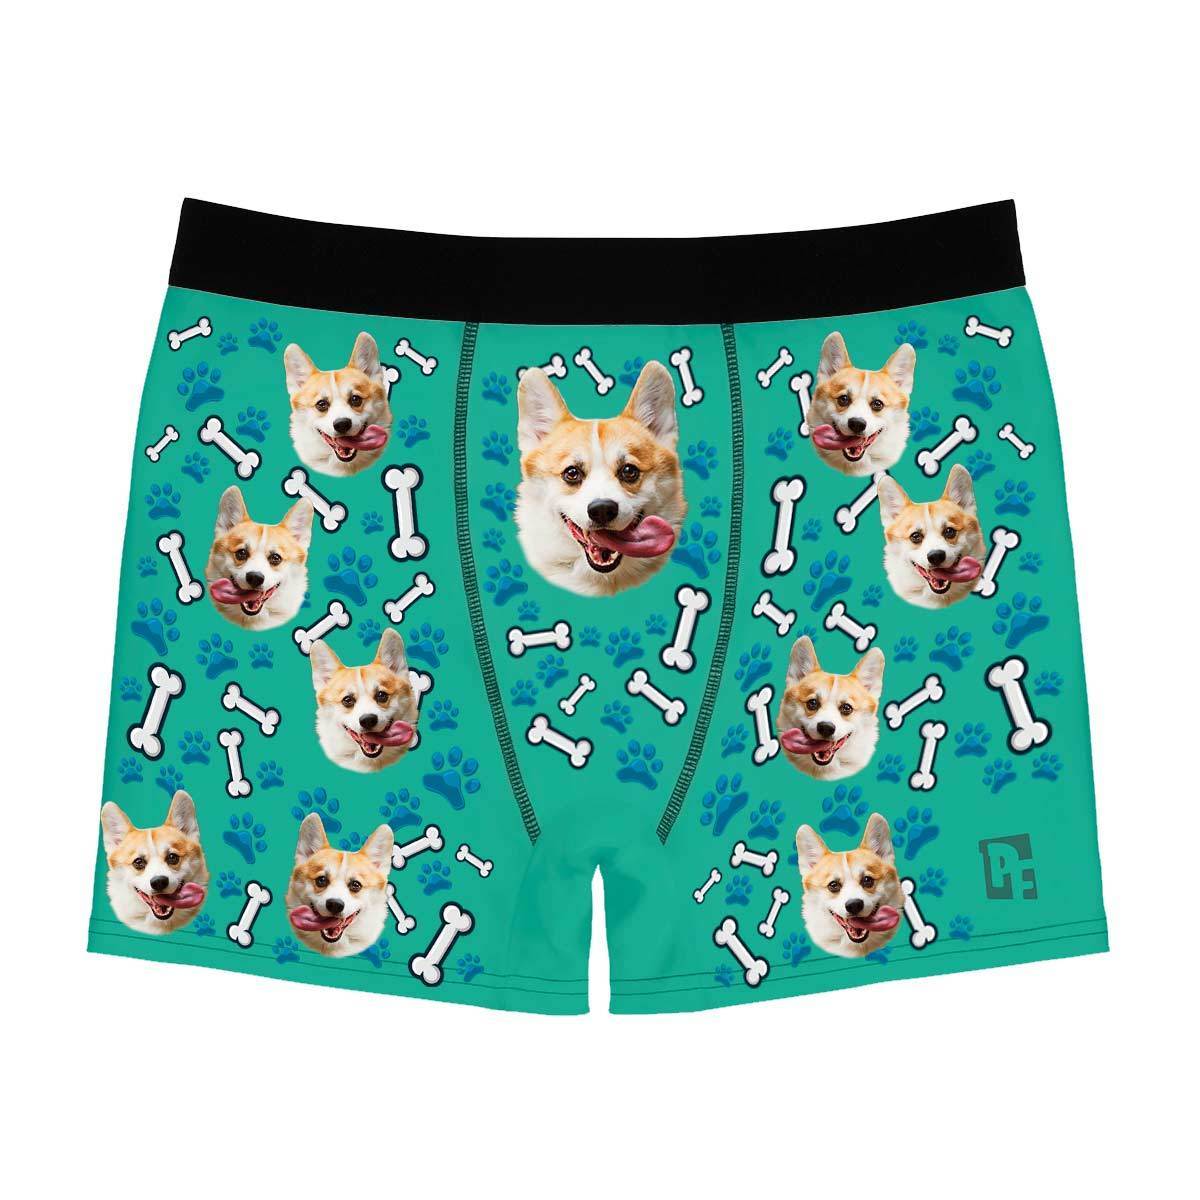 Mint Dog men's boxer briefs personalized with photo printed on them